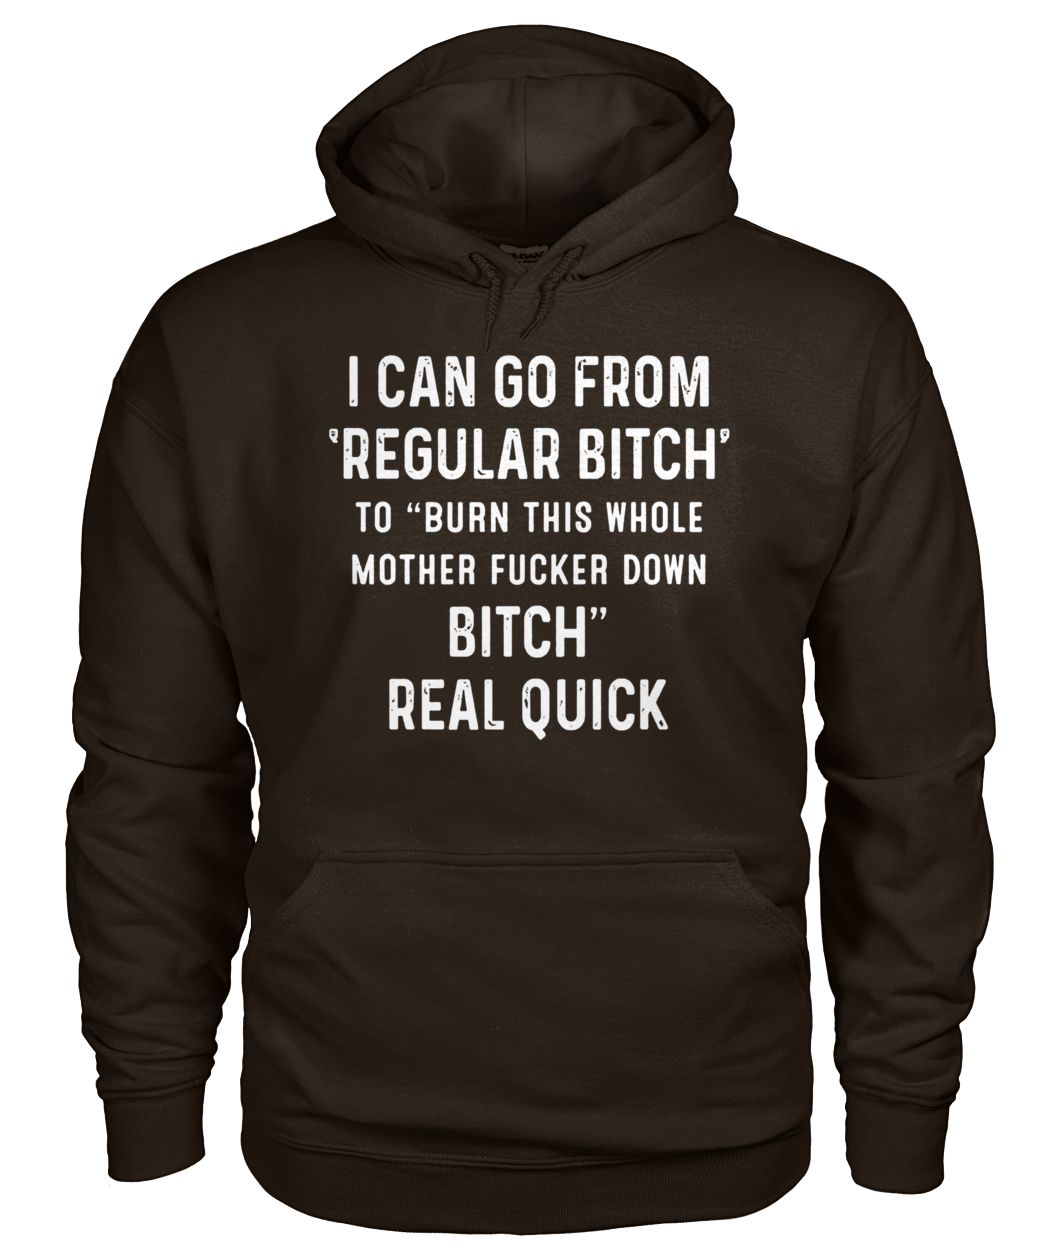 I can go from regular bitch to burn this whole mother fucker down bitch real quick gildan hoodie